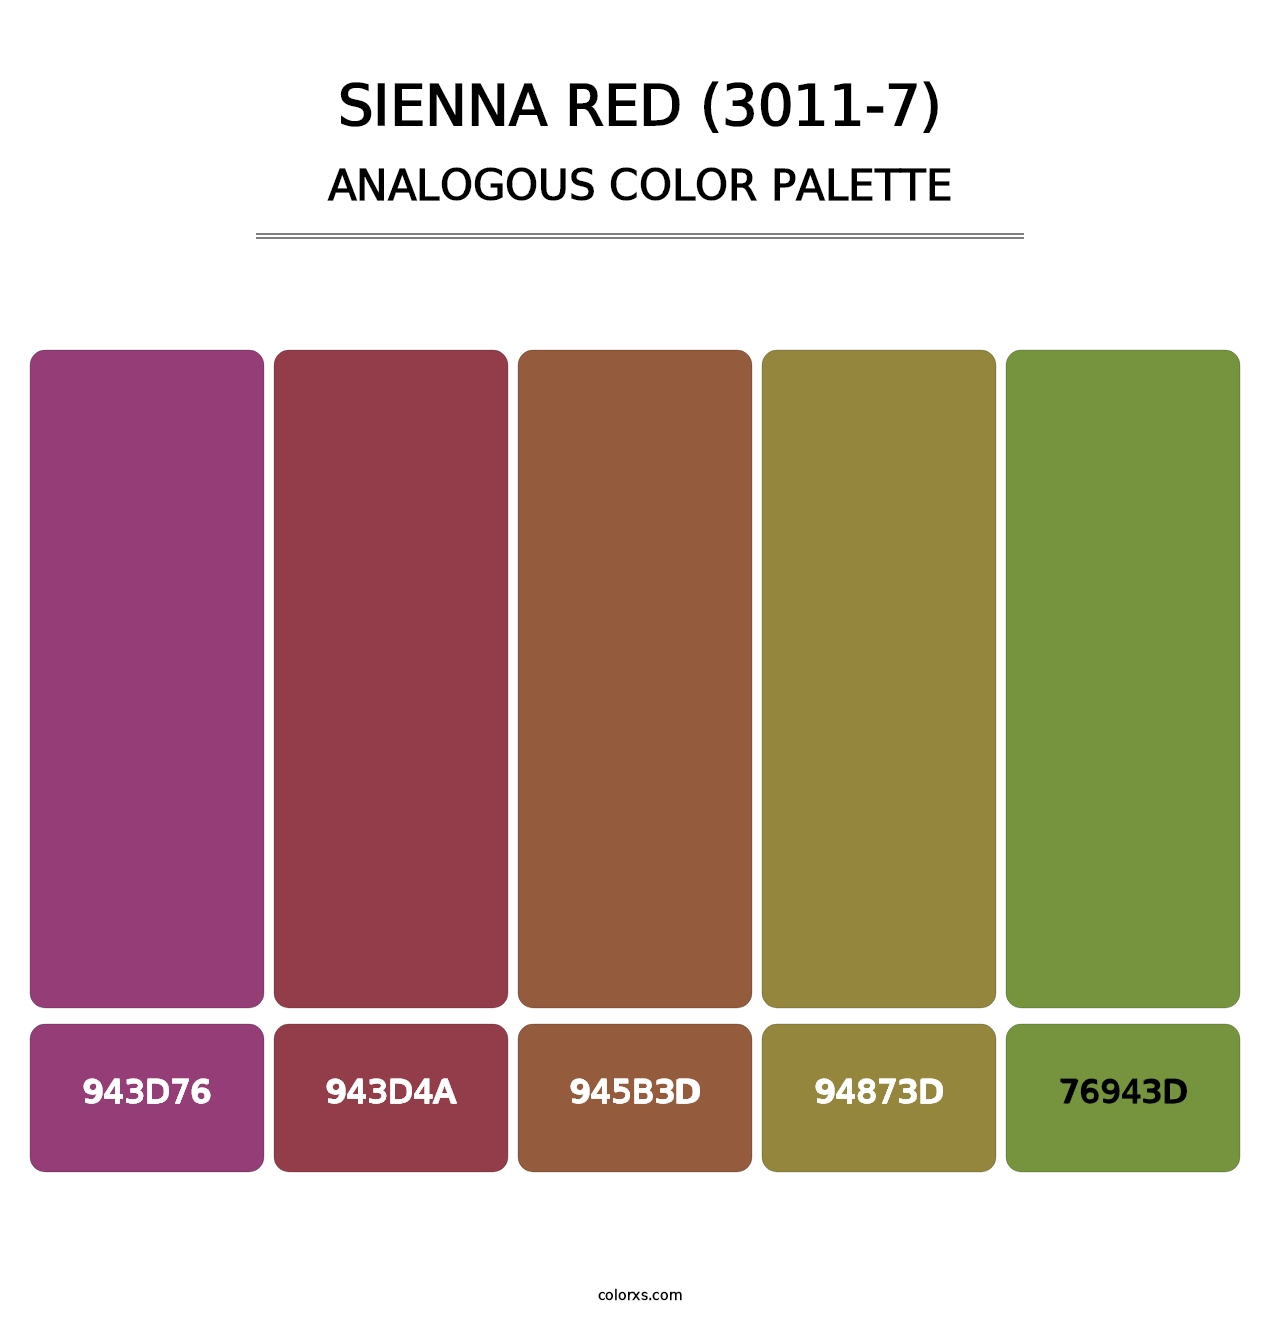 Sienna Red (3011-7) - Analogous Color Palette